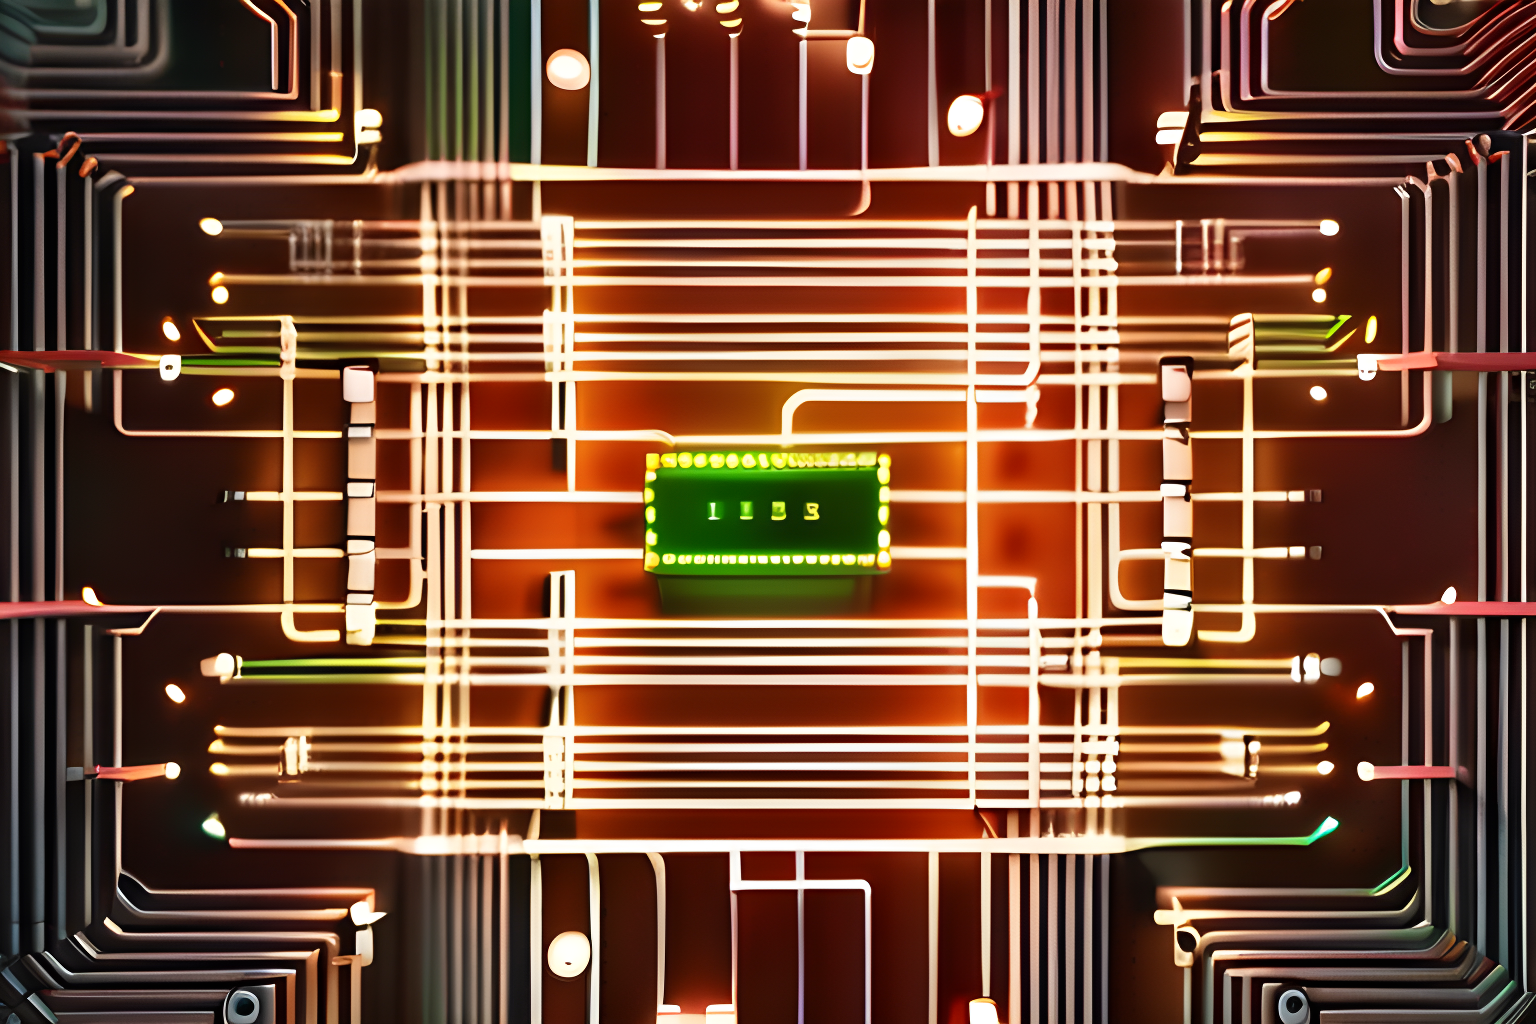 A 3-dimensional circuit board with lit-up interconnected nodes